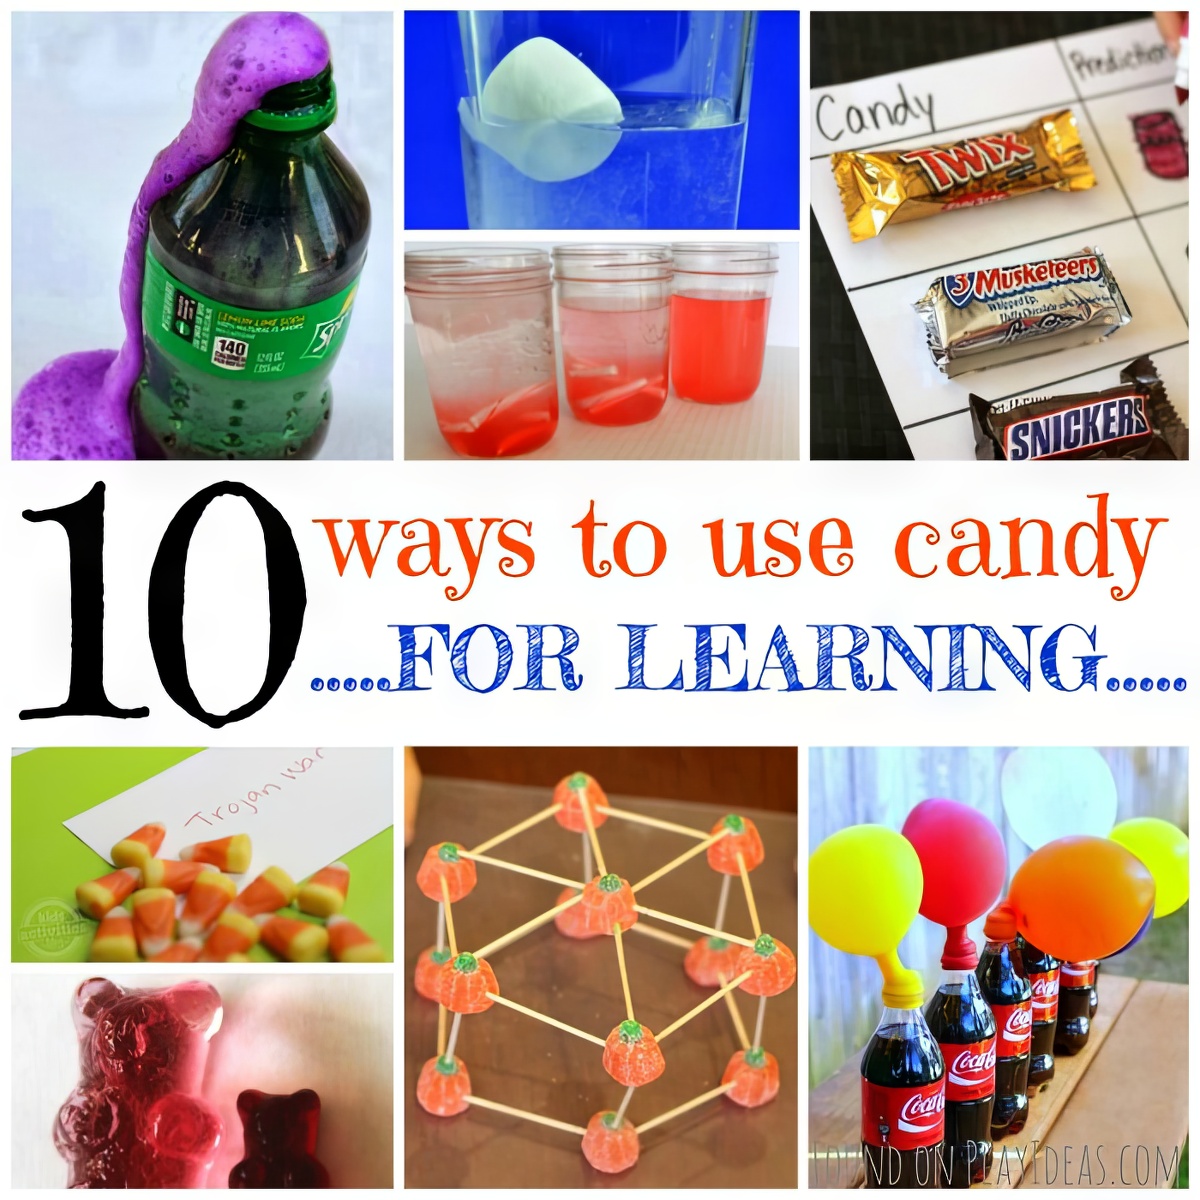 Go ahead and read to know more about these 10 awesome and fun ways to use candy for learning!